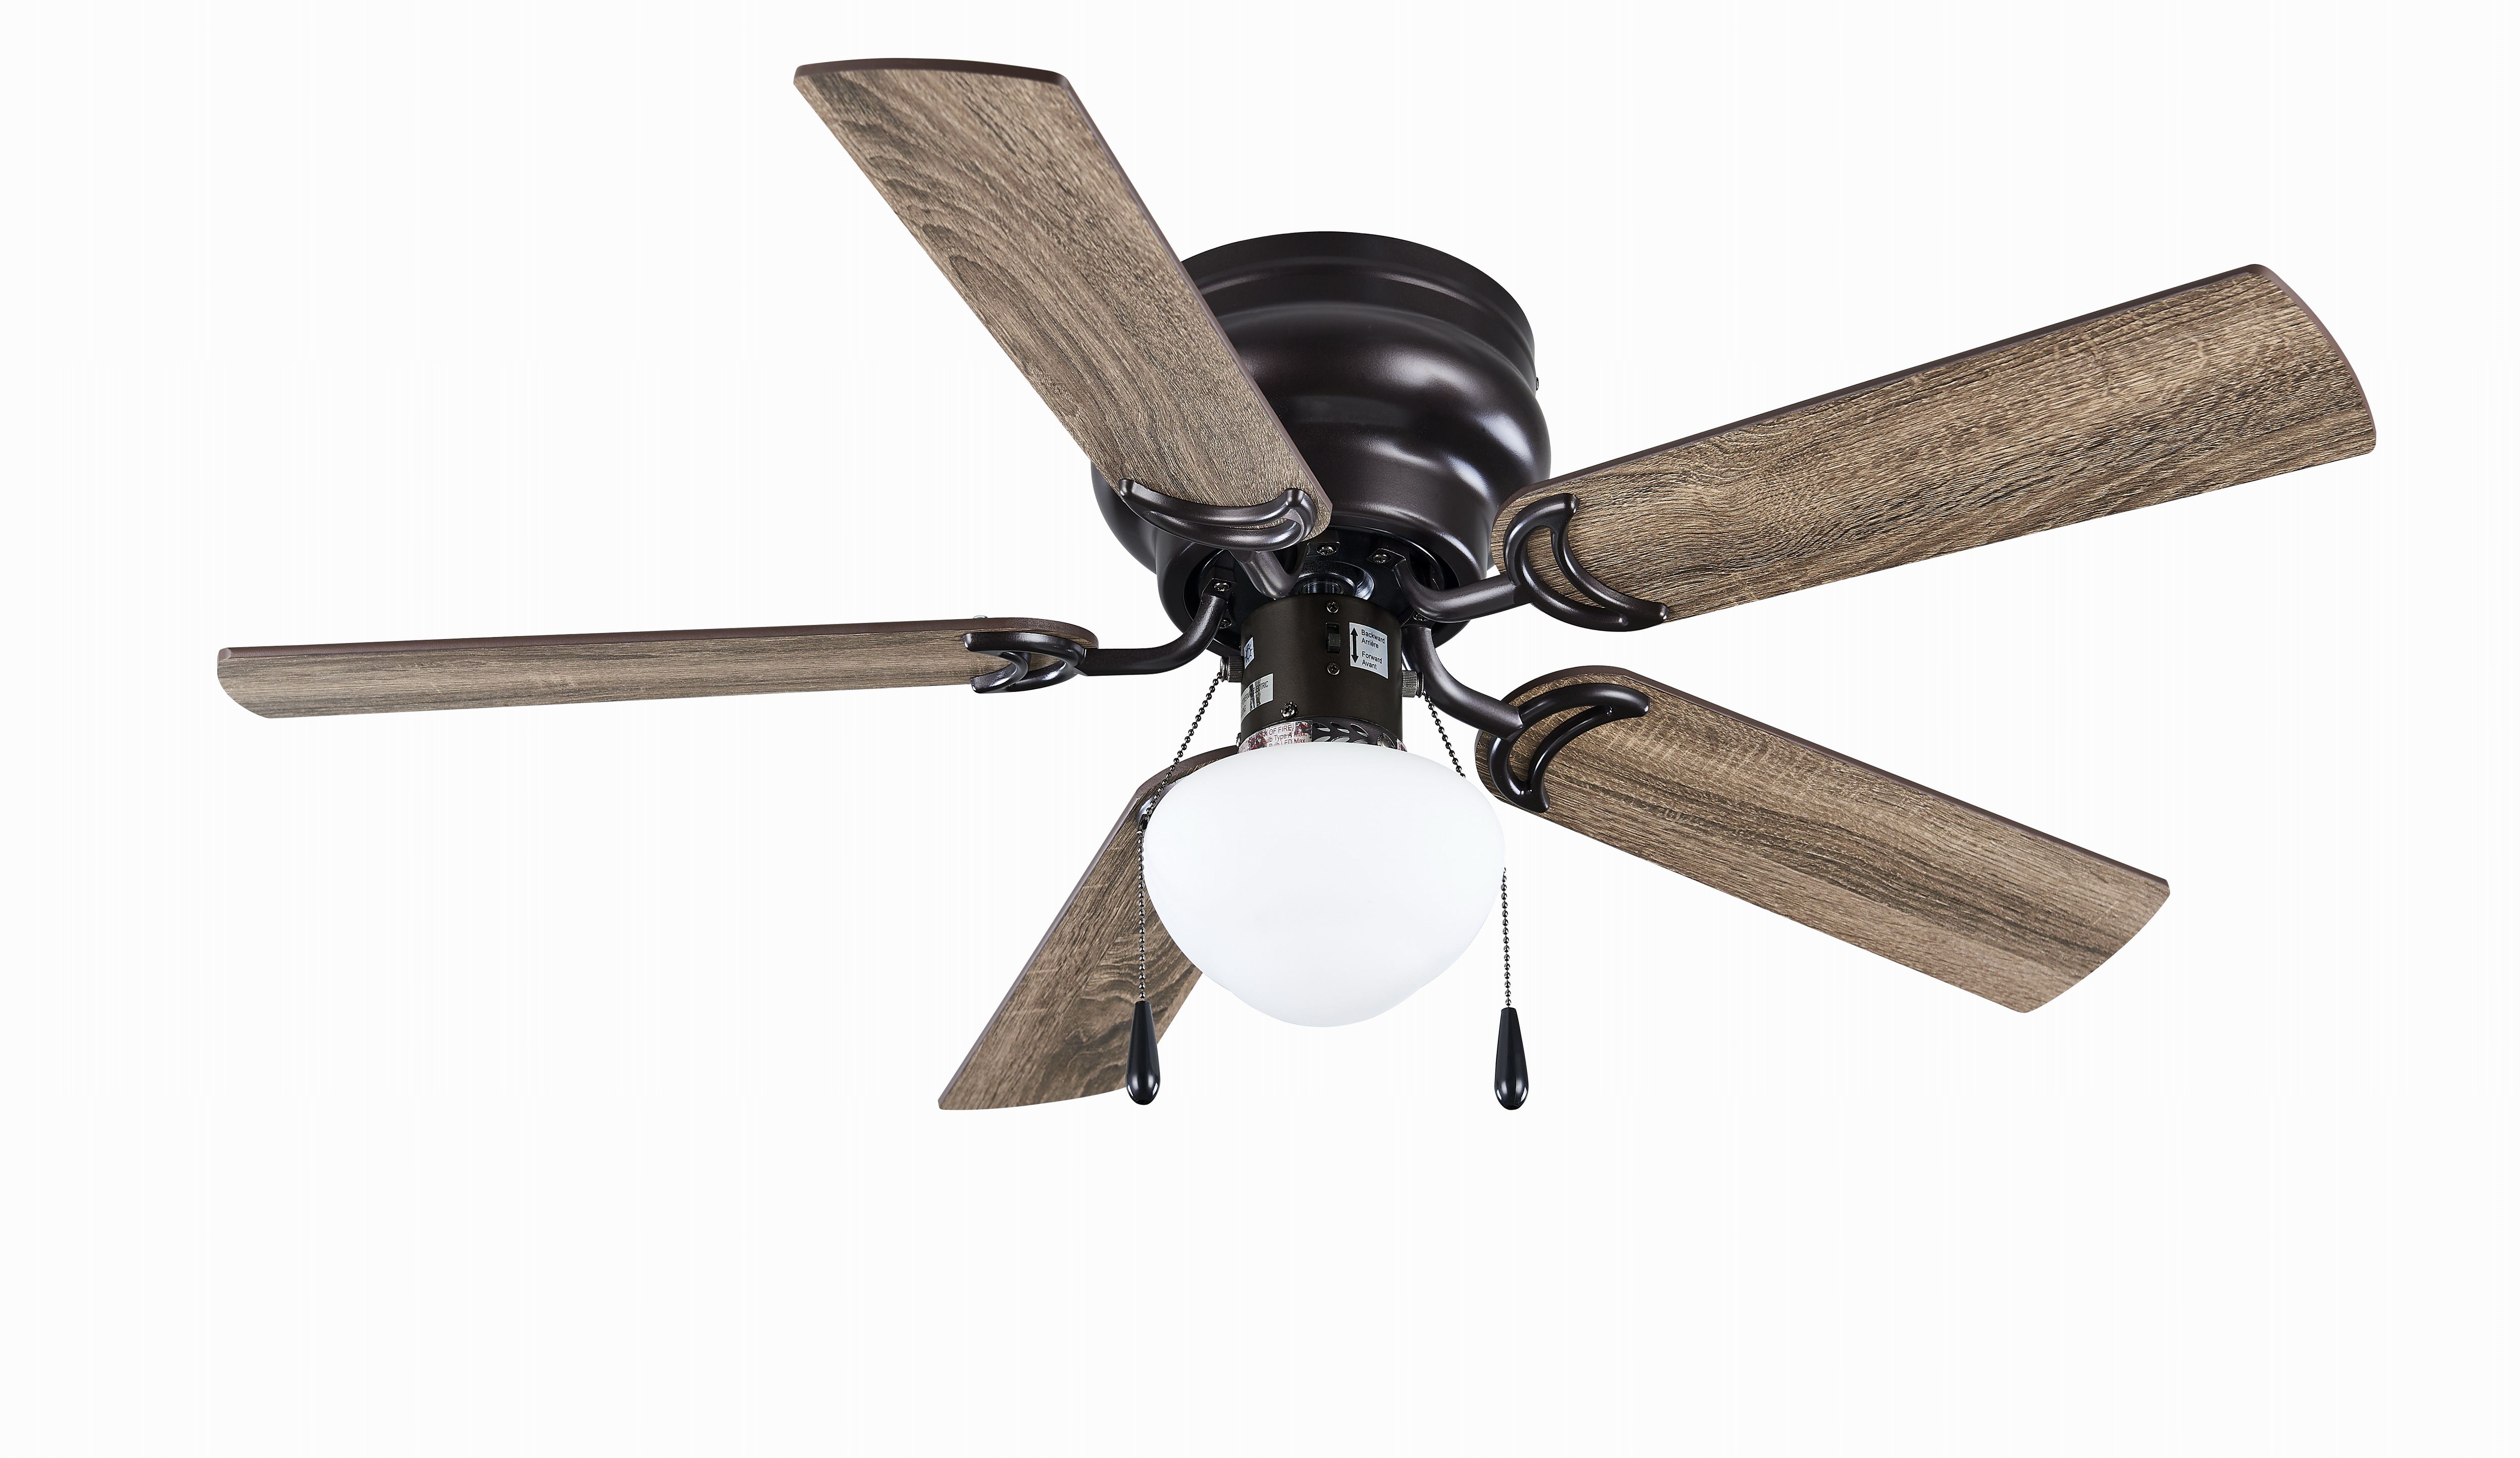 Mainstays 44" Hugger Indoor Ceiling Fan with Single Light, Bronze, 5 Blades, LED Bulb, Reverse Airflow - image 3 of 8